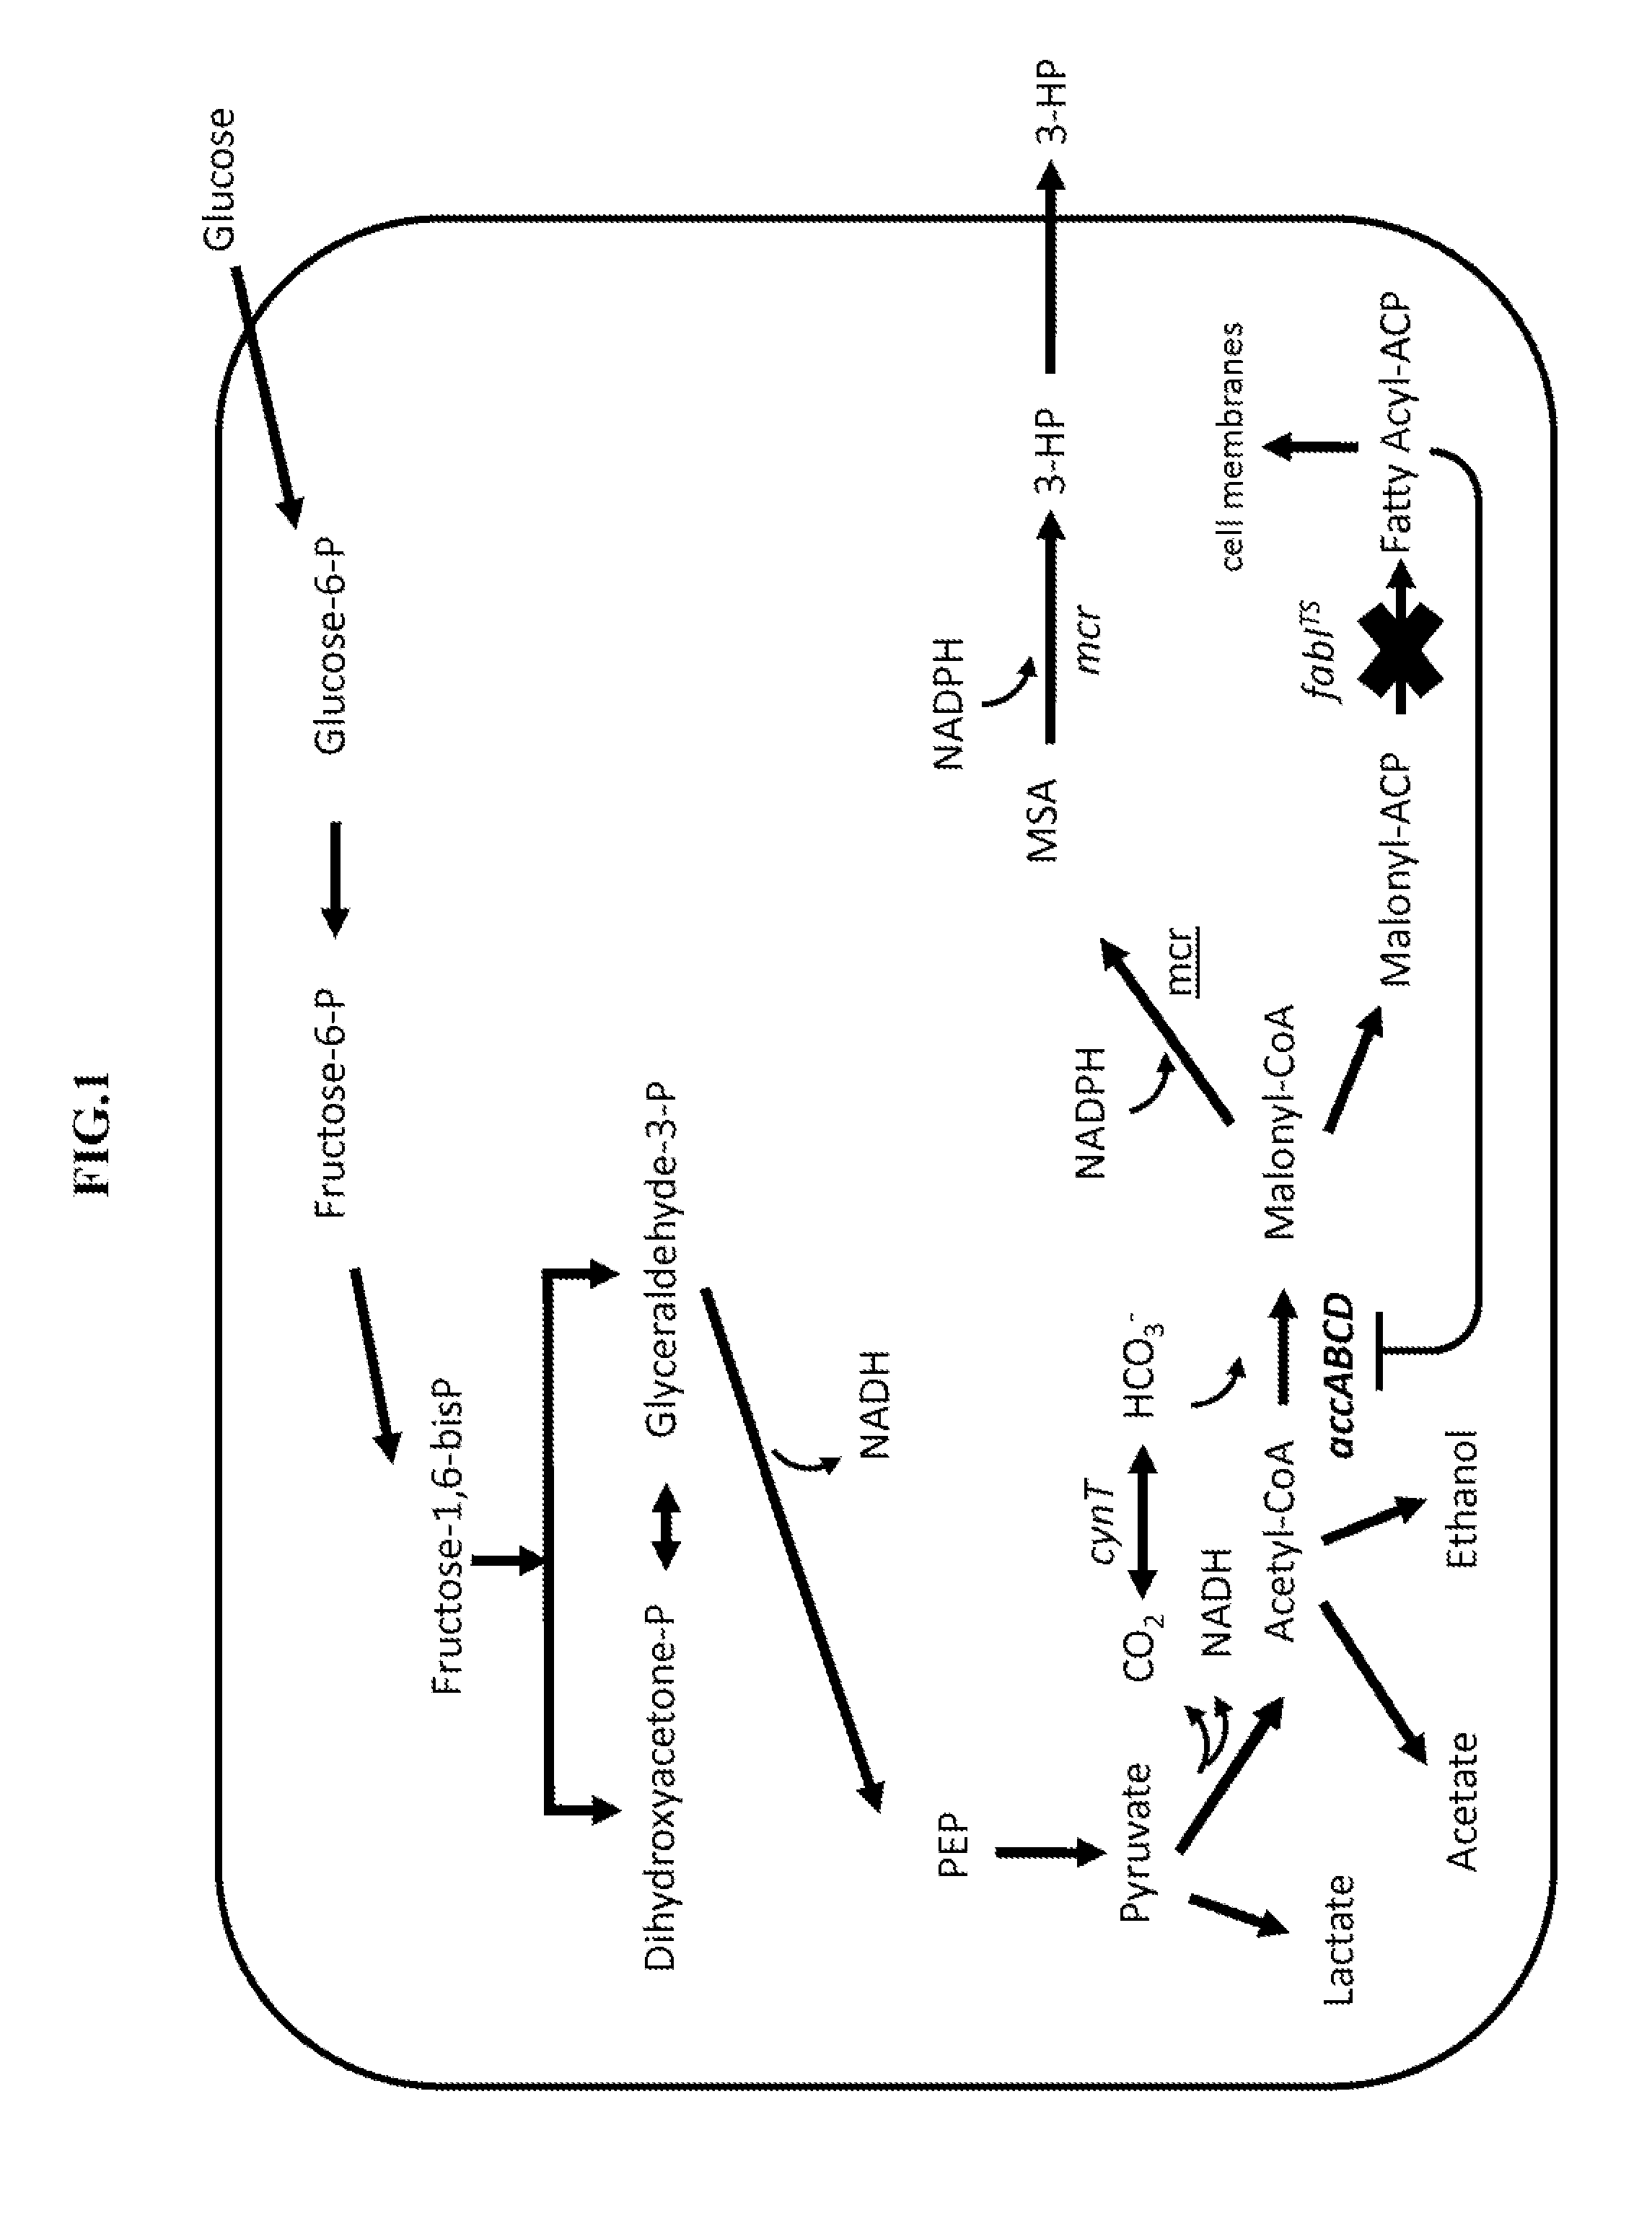 Methods for producing 3-hydroxypropionic acid and other products